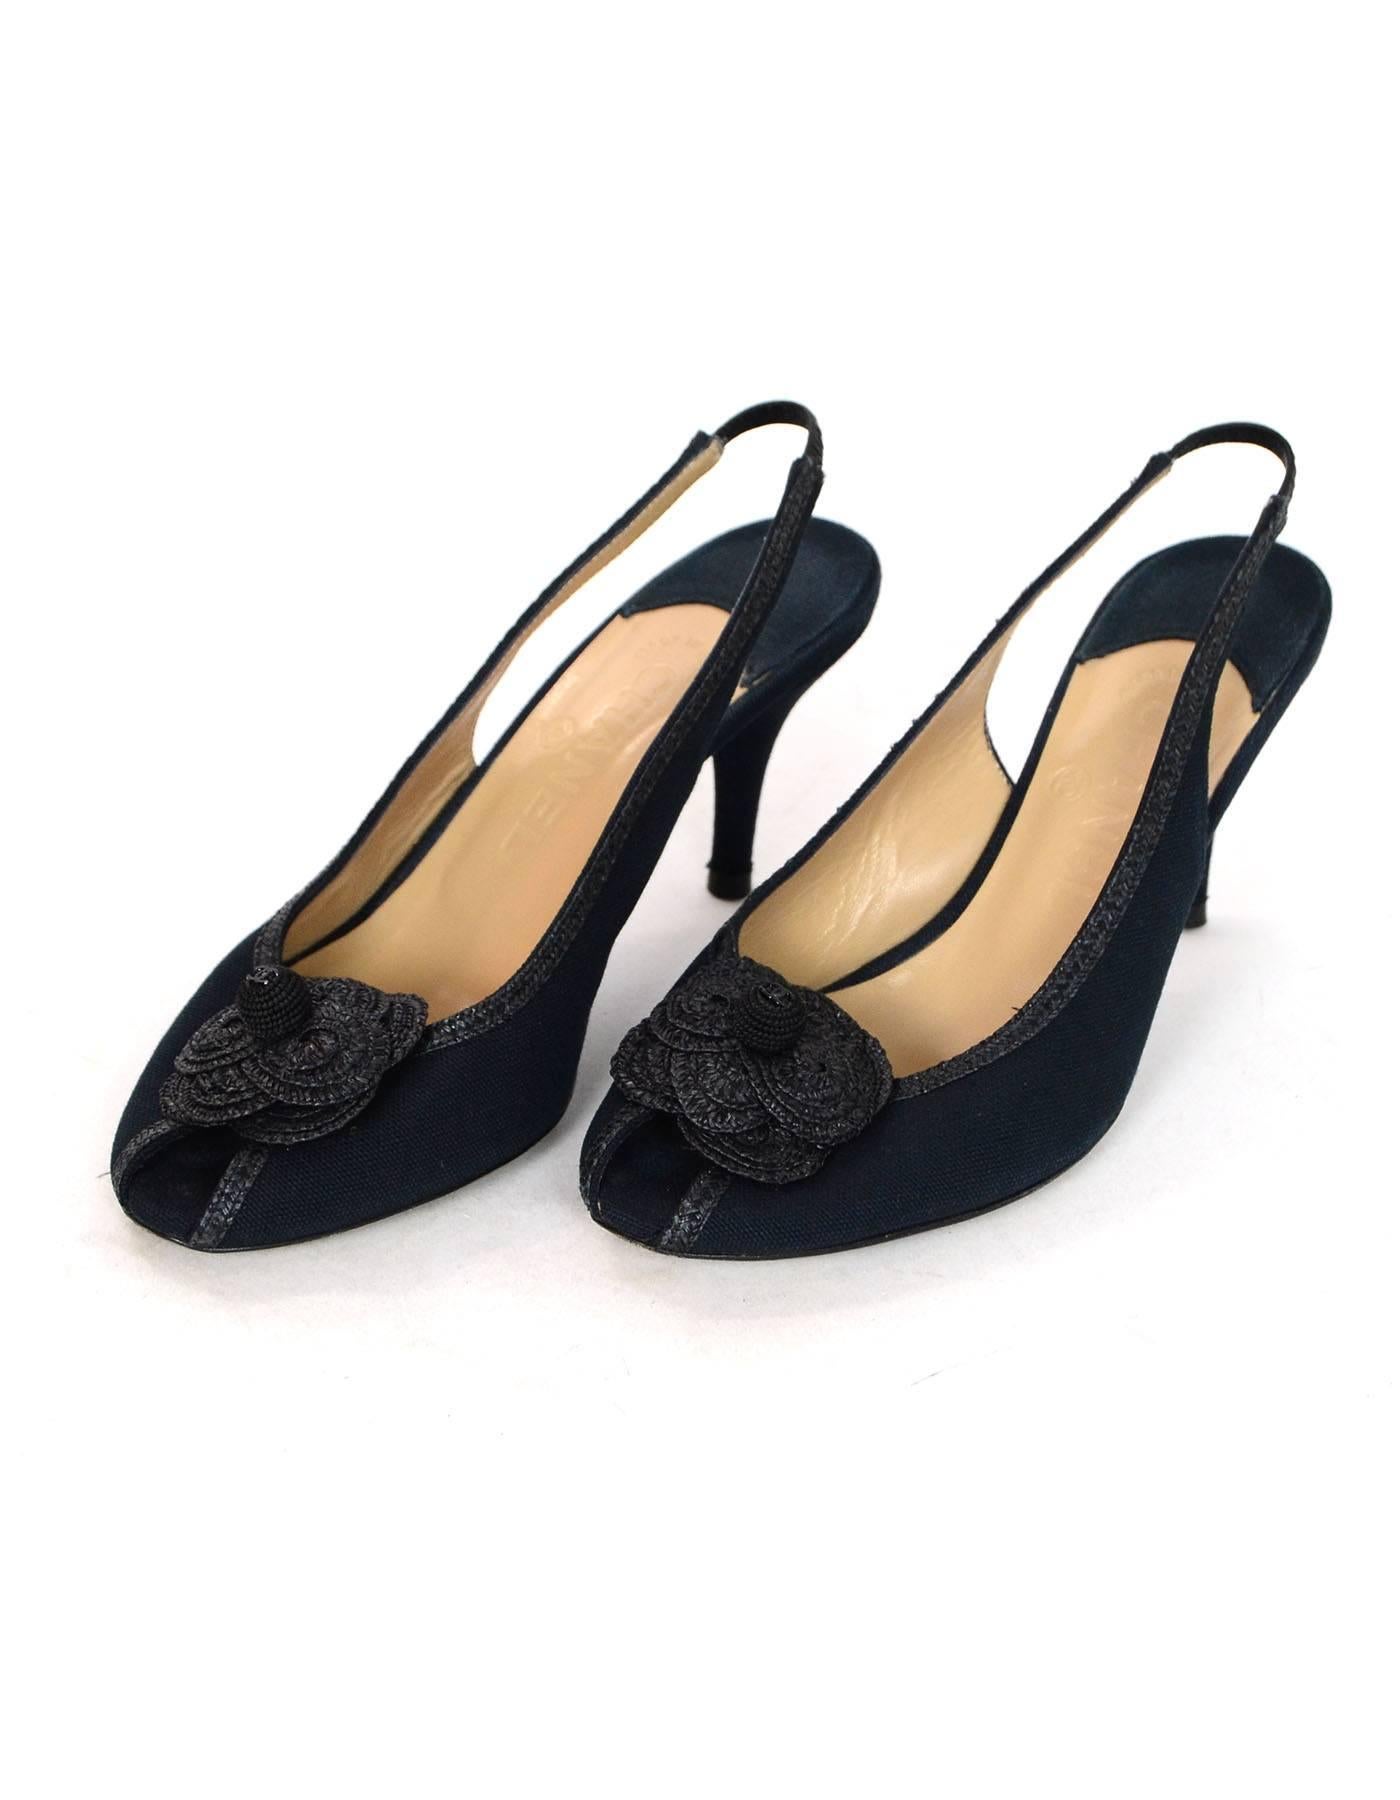 Chanel Black Canvas Peep-Toe Slingback Pumps Sz 38

Made In: Italy
Color: Black
Materials: Canvas
Closure/Opening: Slingback strap
Sole Stamp: CC Made in Italy 38
Overall Condition: Excellent pre-owned condition with the exception of some wear at